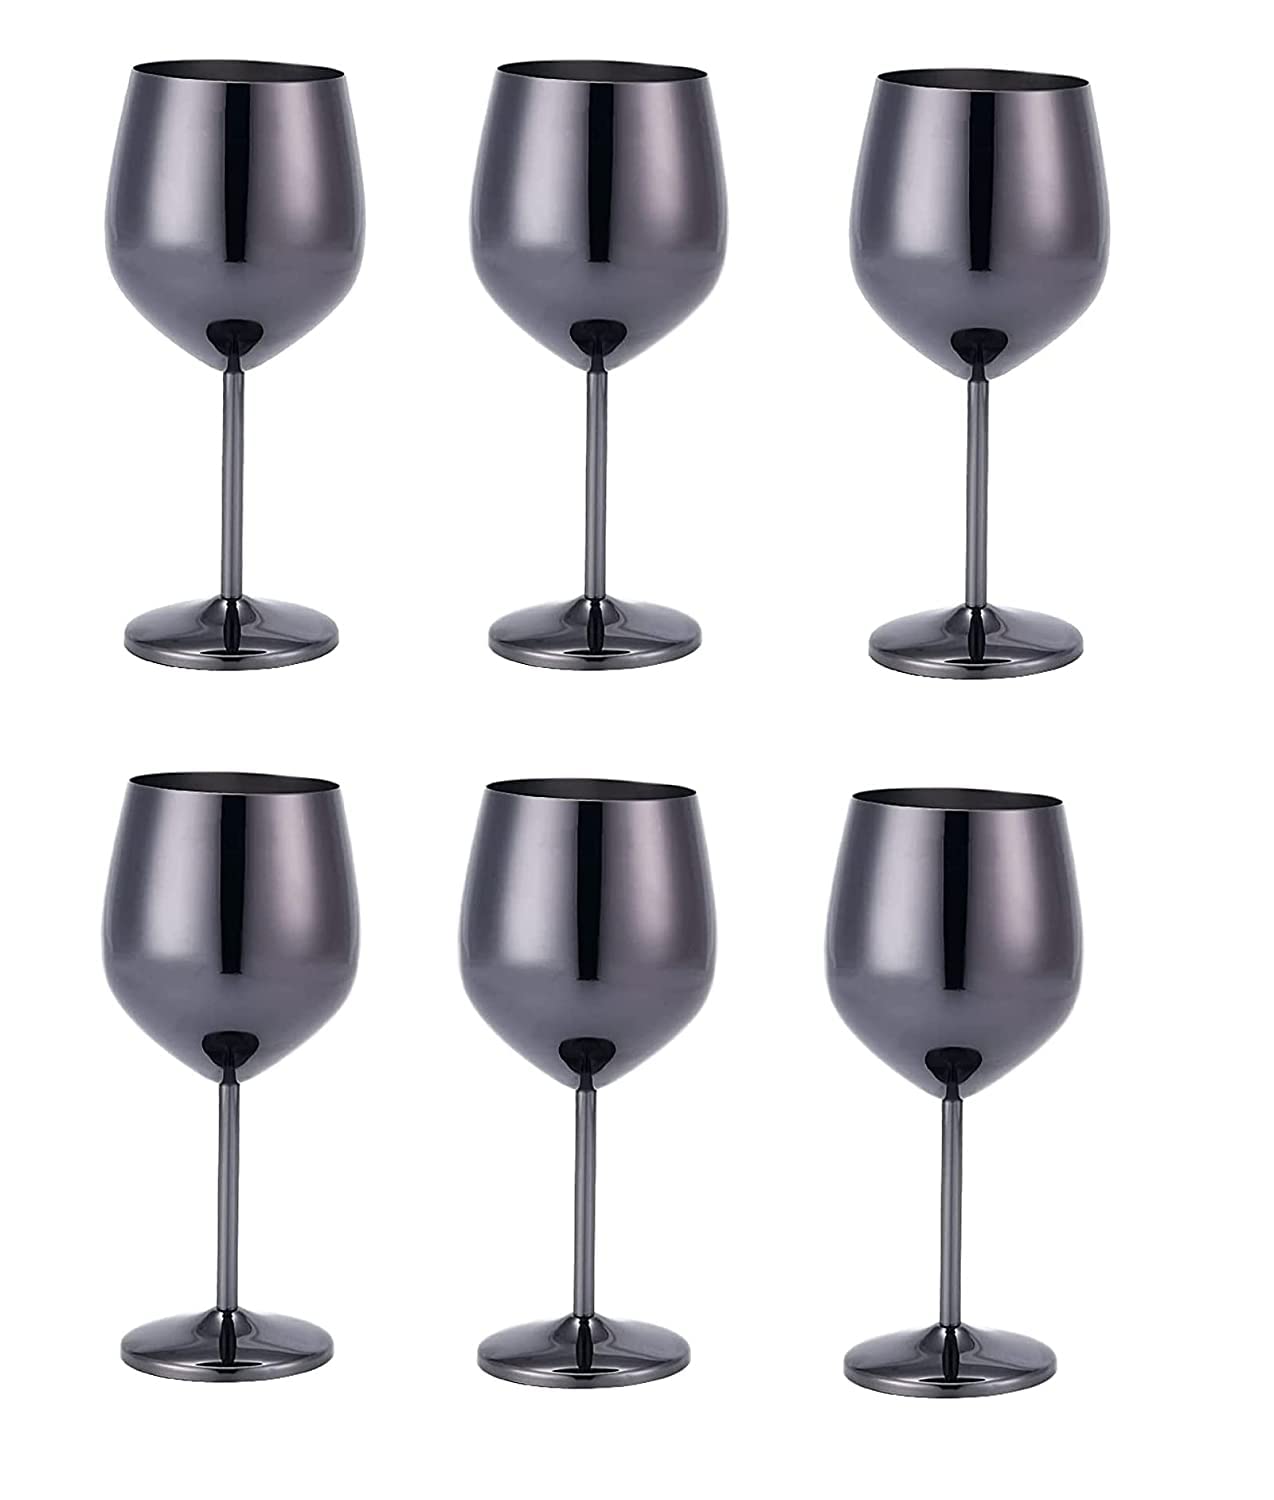 NJ Black Wine Glasses,Shatter Proof steel Unbreakable Wine Glass Goblets, Anniversary and Wedding - Elegant Black Drink ware for Cocktails Gift for Men and Women, Party Supplies - 350 ml: Set of 6 Pcs